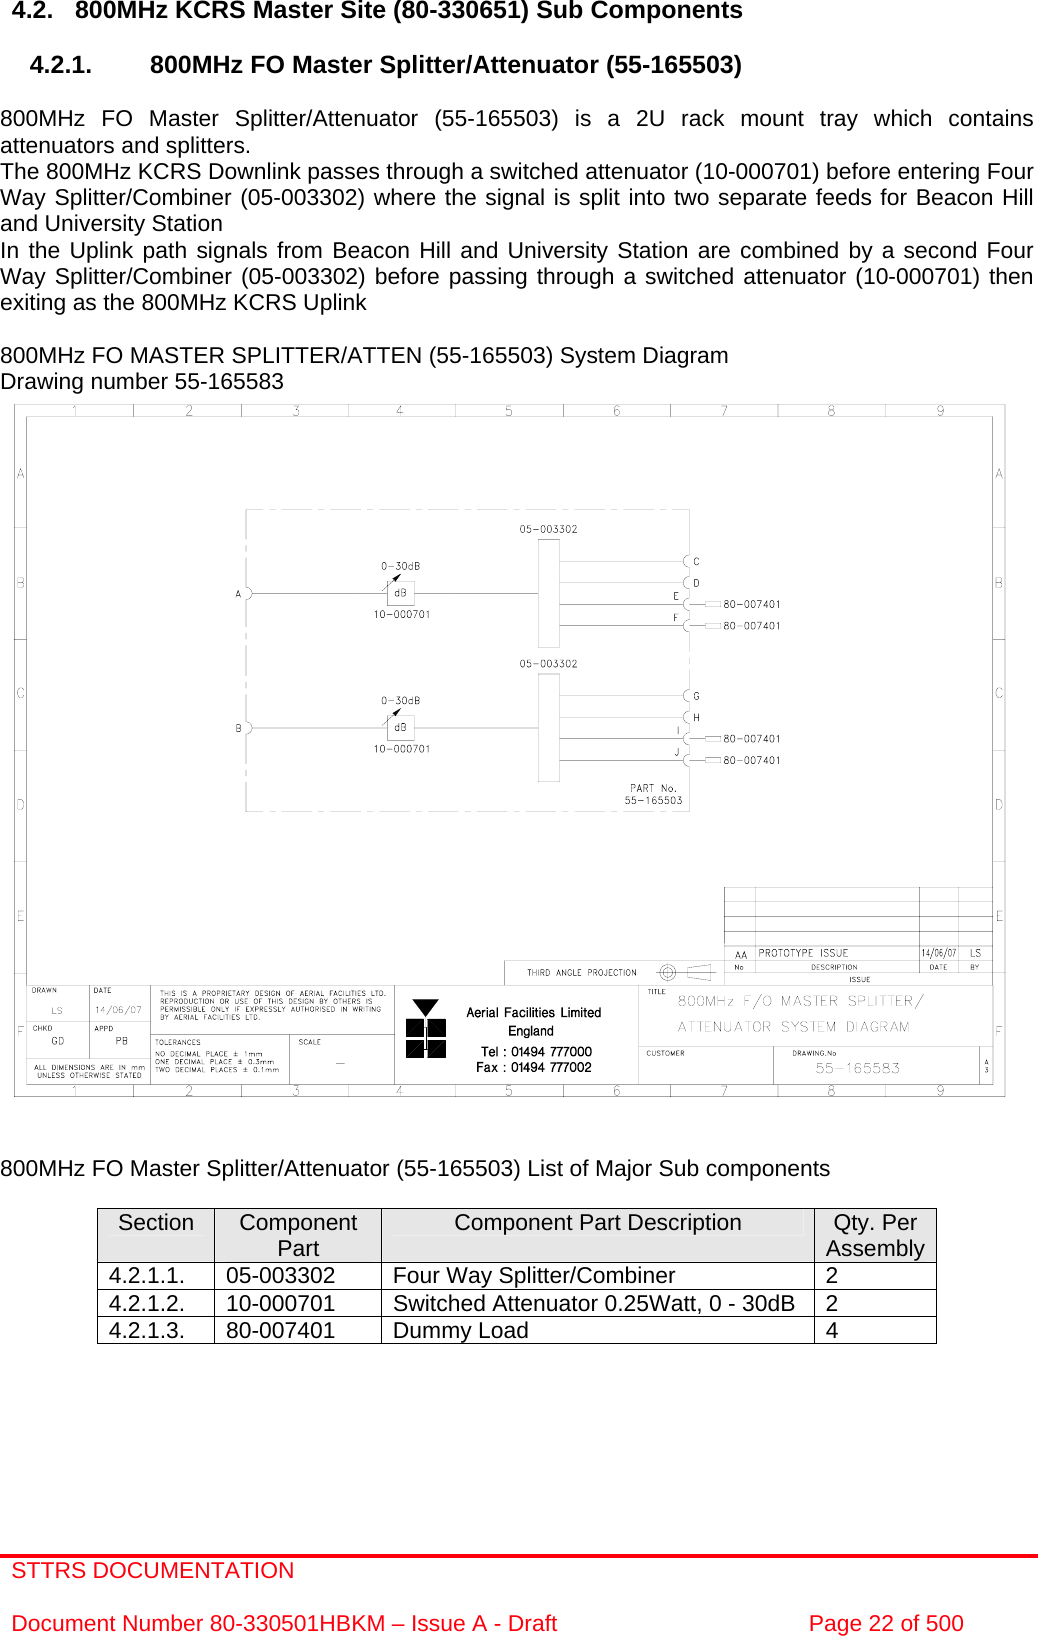 STTRS DOCUMENTATION  Document Number 80-330501HBKM – Issue A - Draft  Page 22 of 500   4.2.  800MHz KCRS Master Site (80-330651) Sub Components  4.2.1.  800MHz FO Master Splitter/Attenuator (55-165503)  800MHz FO Master Splitter/Attenuator (55-165503) is a 2U rack mount tray which contains attenuators and splitters.  The 800MHz KCRS Downlink passes through a switched attenuator (10-000701) before entering Four Way Splitter/Combiner (05-003302) where the signal is split into two separate feeds for Beacon Hill and University Station In the Uplink path signals from Beacon Hill and University Station are combined by a second Four Way Splitter/Combiner (05-003302) before passing through a switched attenuator (10-000701) then exiting as the 800MHz KCRS Uplink  800MHz FO MASTER SPLITTER/ATTEN (55-165503) System Diagram Drawing number 55-165583                              800MHz FO Master Splitter/Attenuator (55-165503) List of Major Sub components  Section  Component Part  Component Part Description  Qty. Per Assembly4.2.1.1.  05-003302  Four Way Splitter/Combiner  2 4.2.1.2.  10-000701  Switched Attenuator 0.25Watt, 0 - 30dB  2 4.2.1.3. 80-007401  Dummy Load  4    